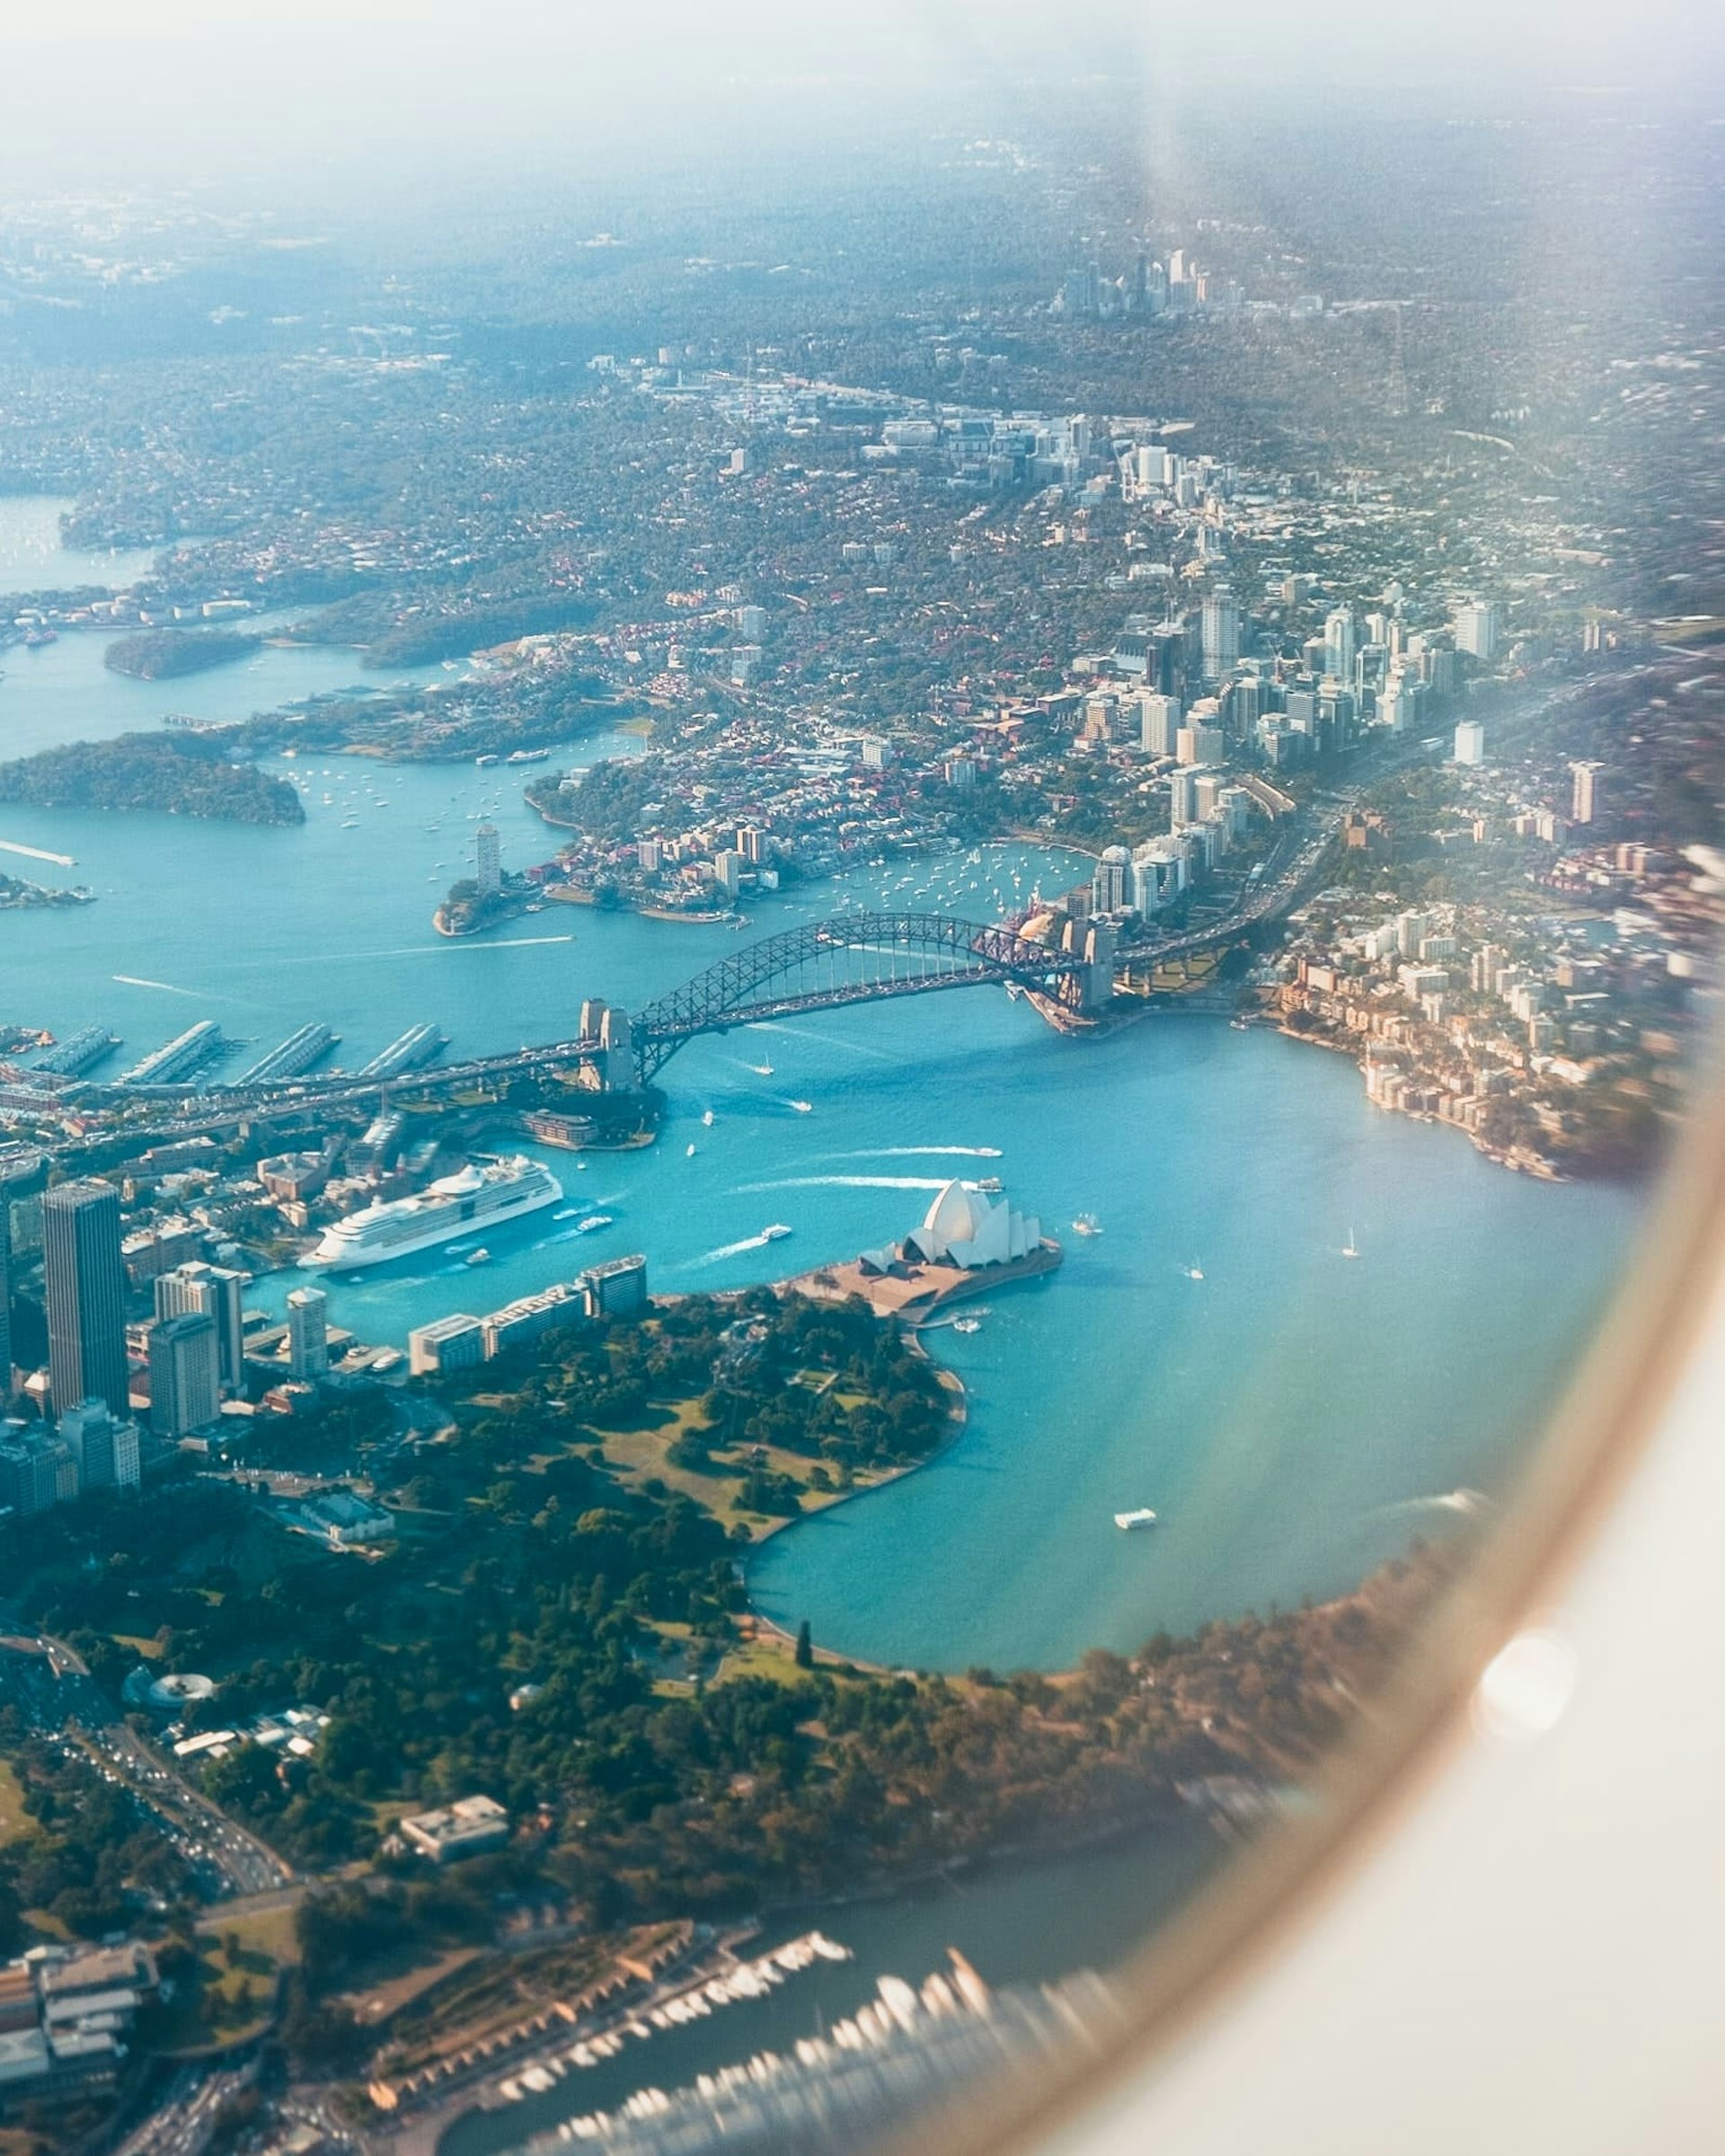 Sydney Harbour as seen from an airplane window.